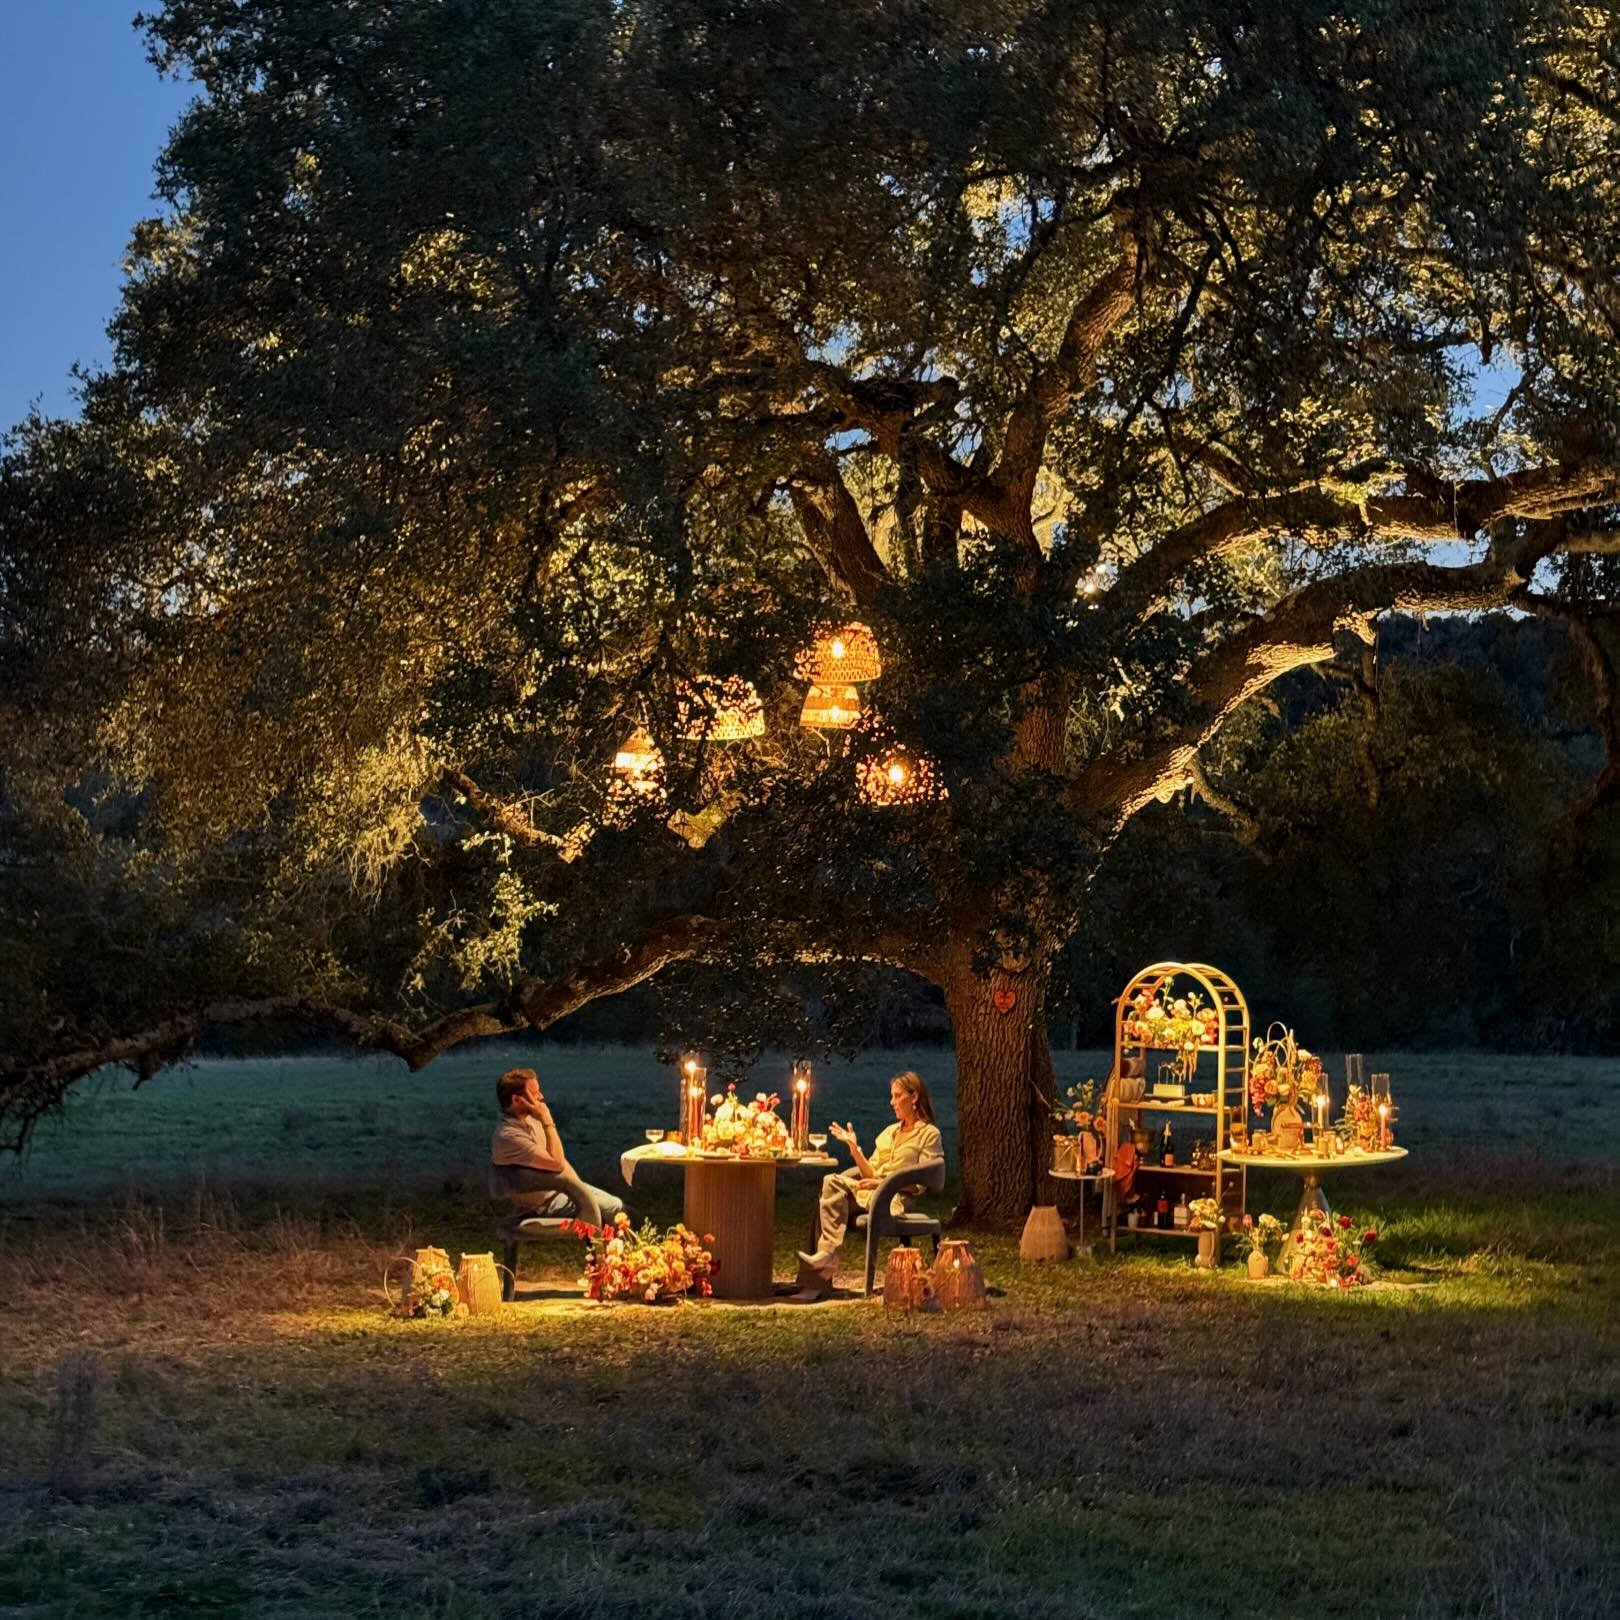 Nothing gets more romantic than this!! Thank you Howard @filoproductionsatx for providing the magic of light! #atxeventplanner #austineventplanner #atxevents #romanticdinner #dinnerfortwo  #undertheoaktree #underthelights